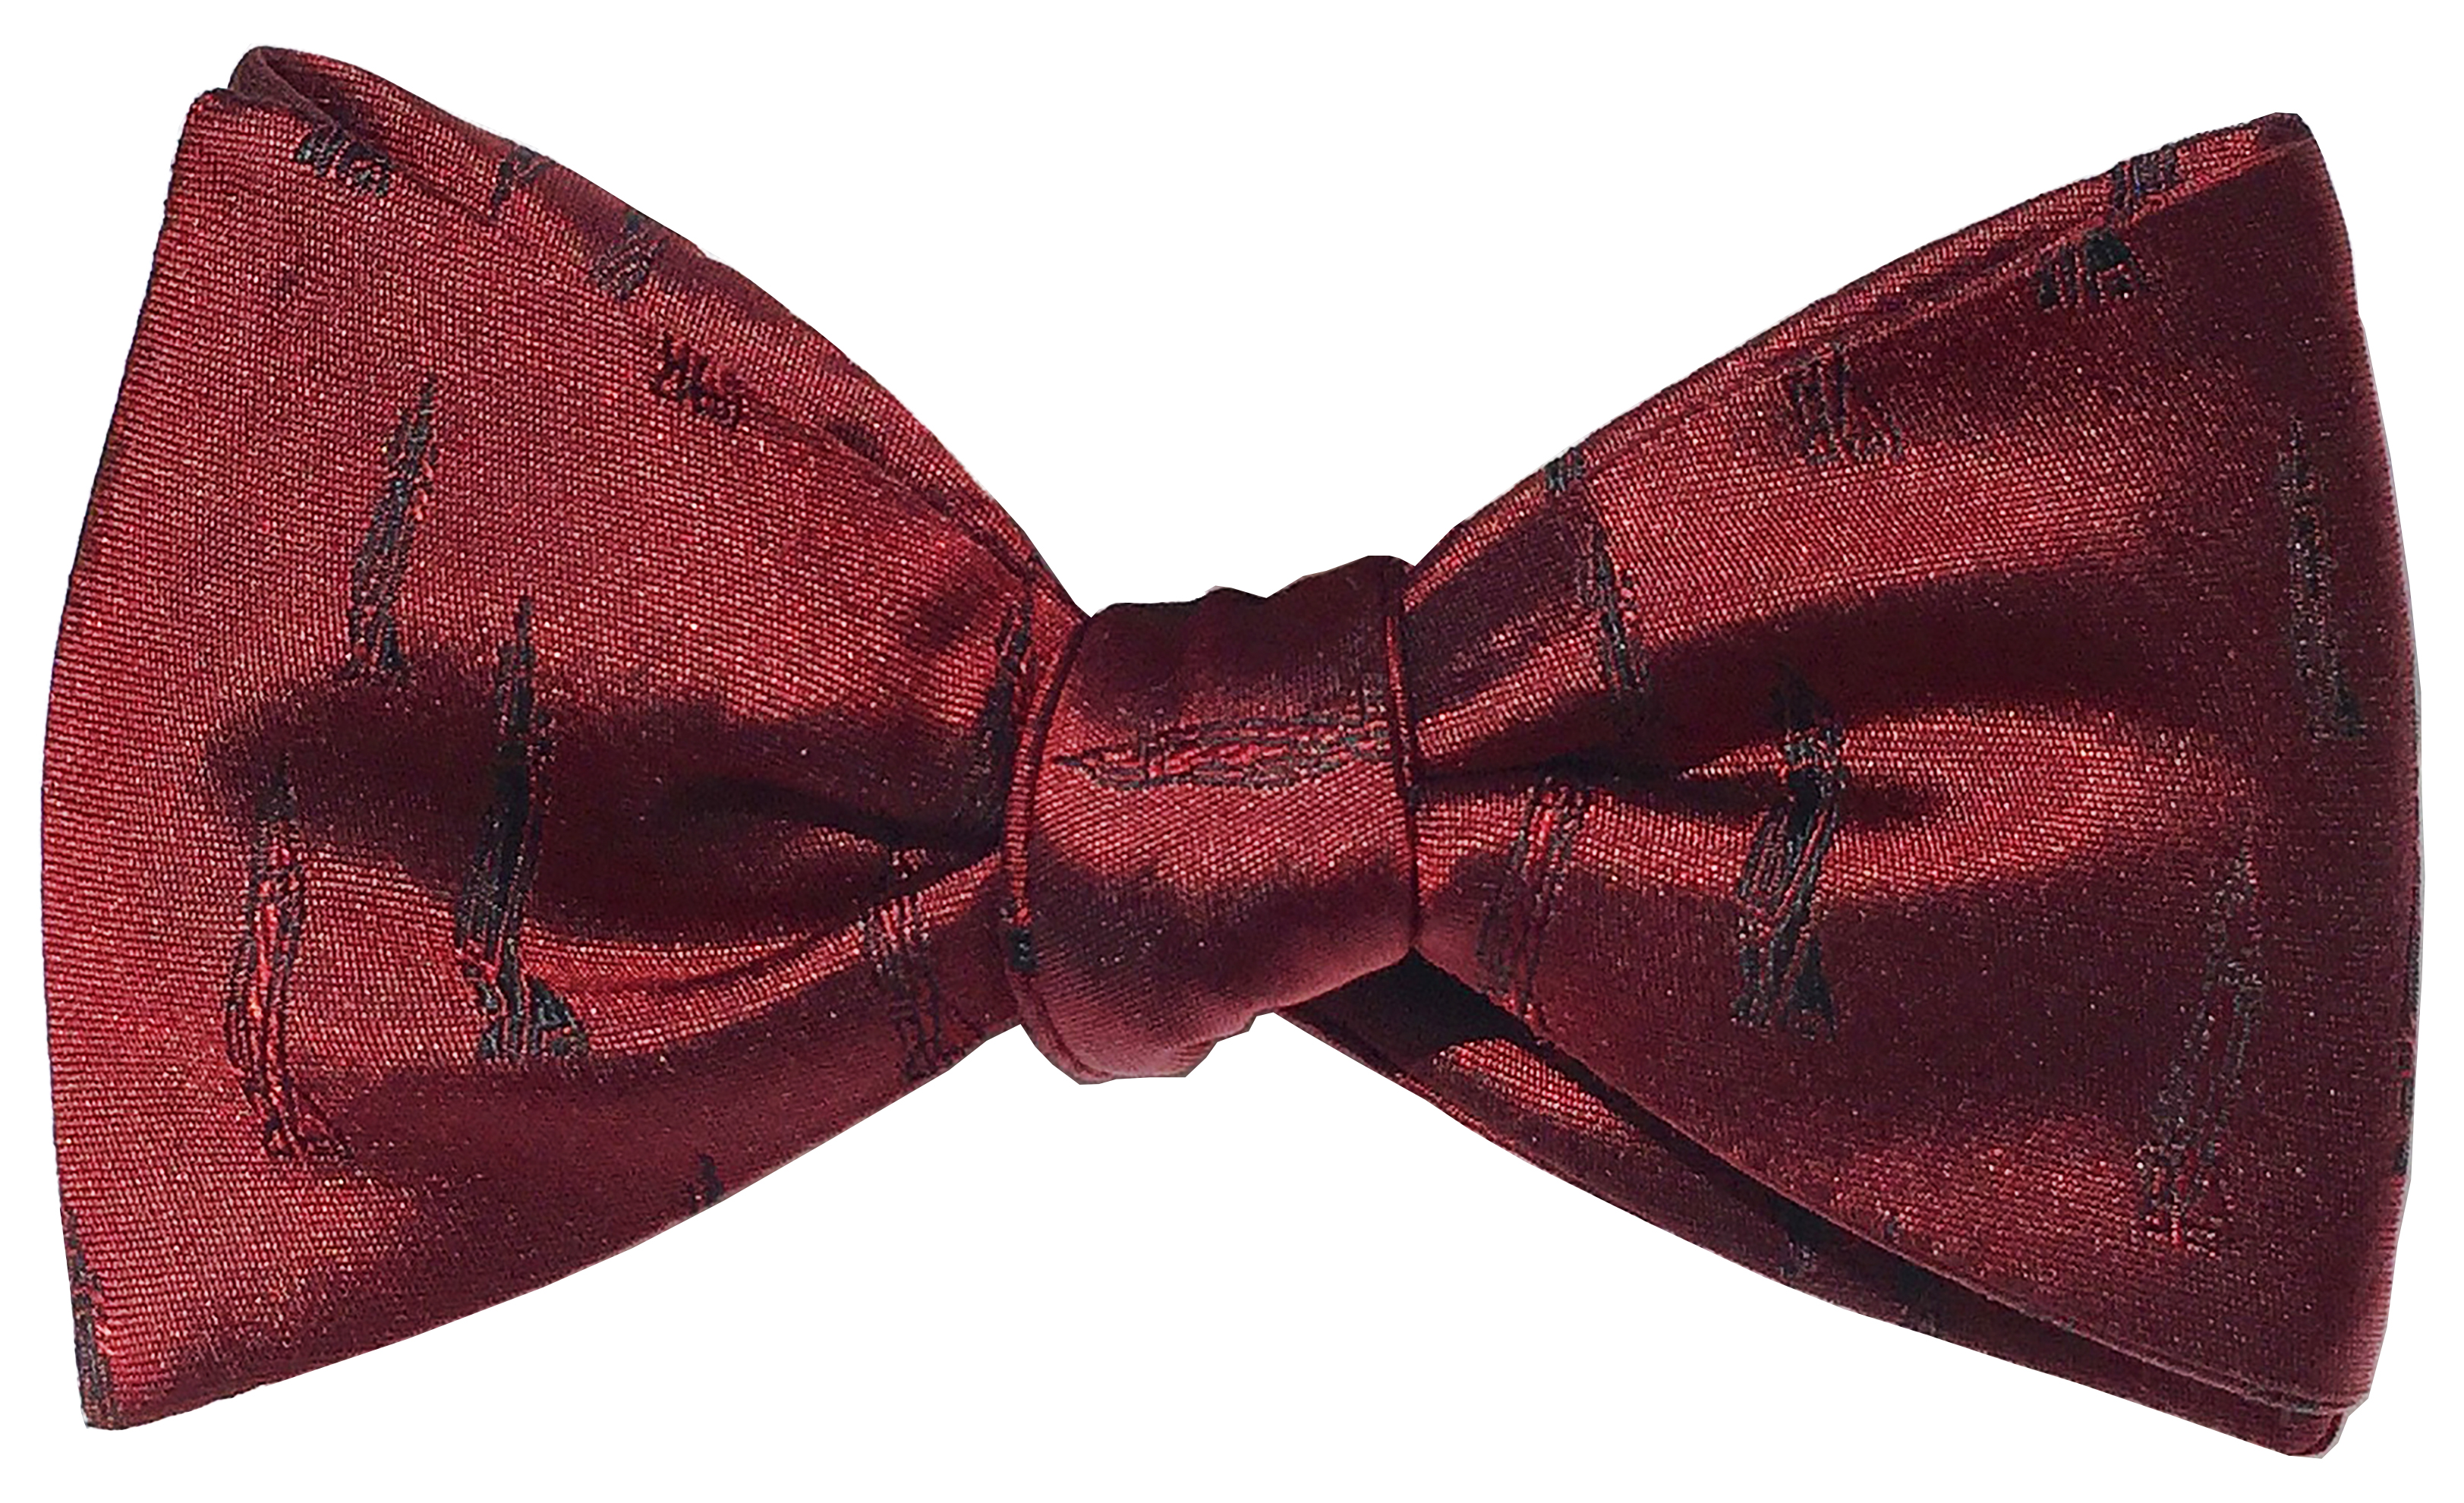 F-4 Phantom bow tie in claret and midnight